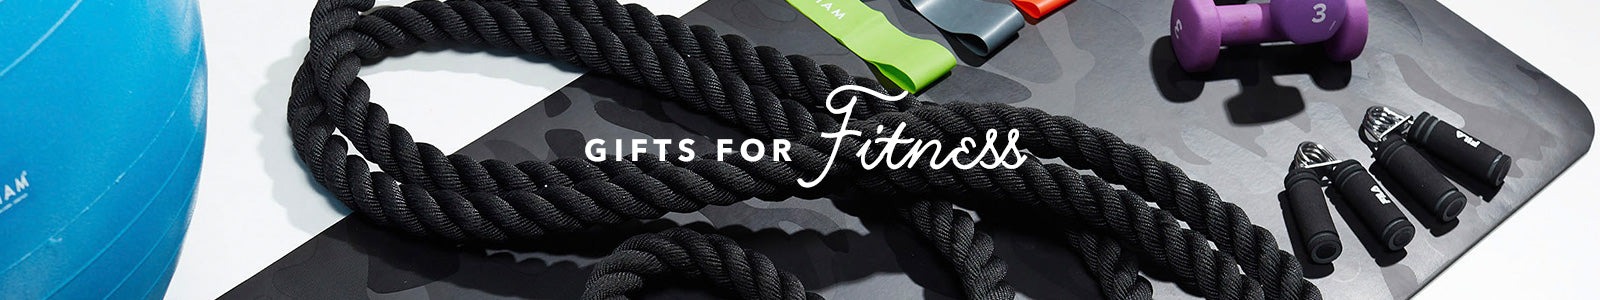 Gifts for Fitness